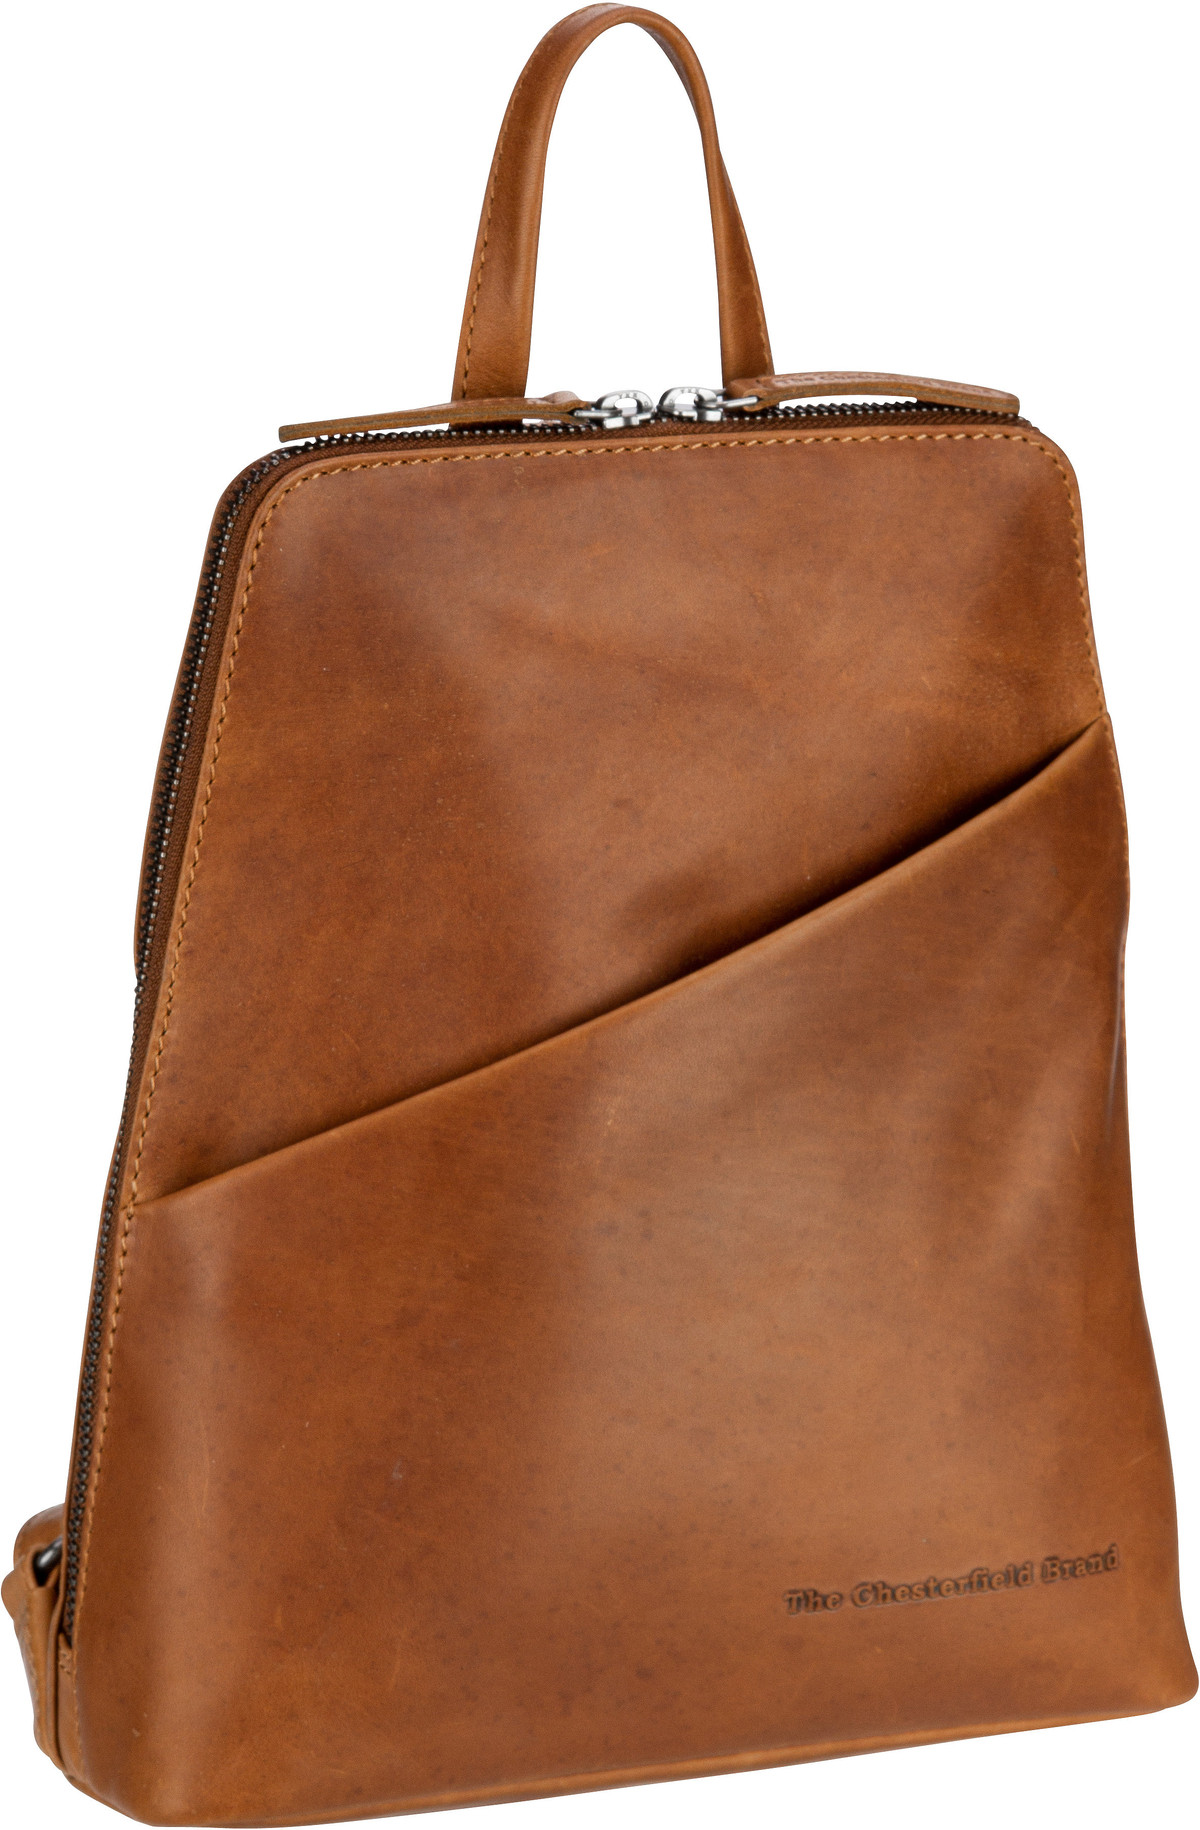 The Chesterfield Brand Claire 0235  in Cognac (7 Liter), Rucksack / Backpack